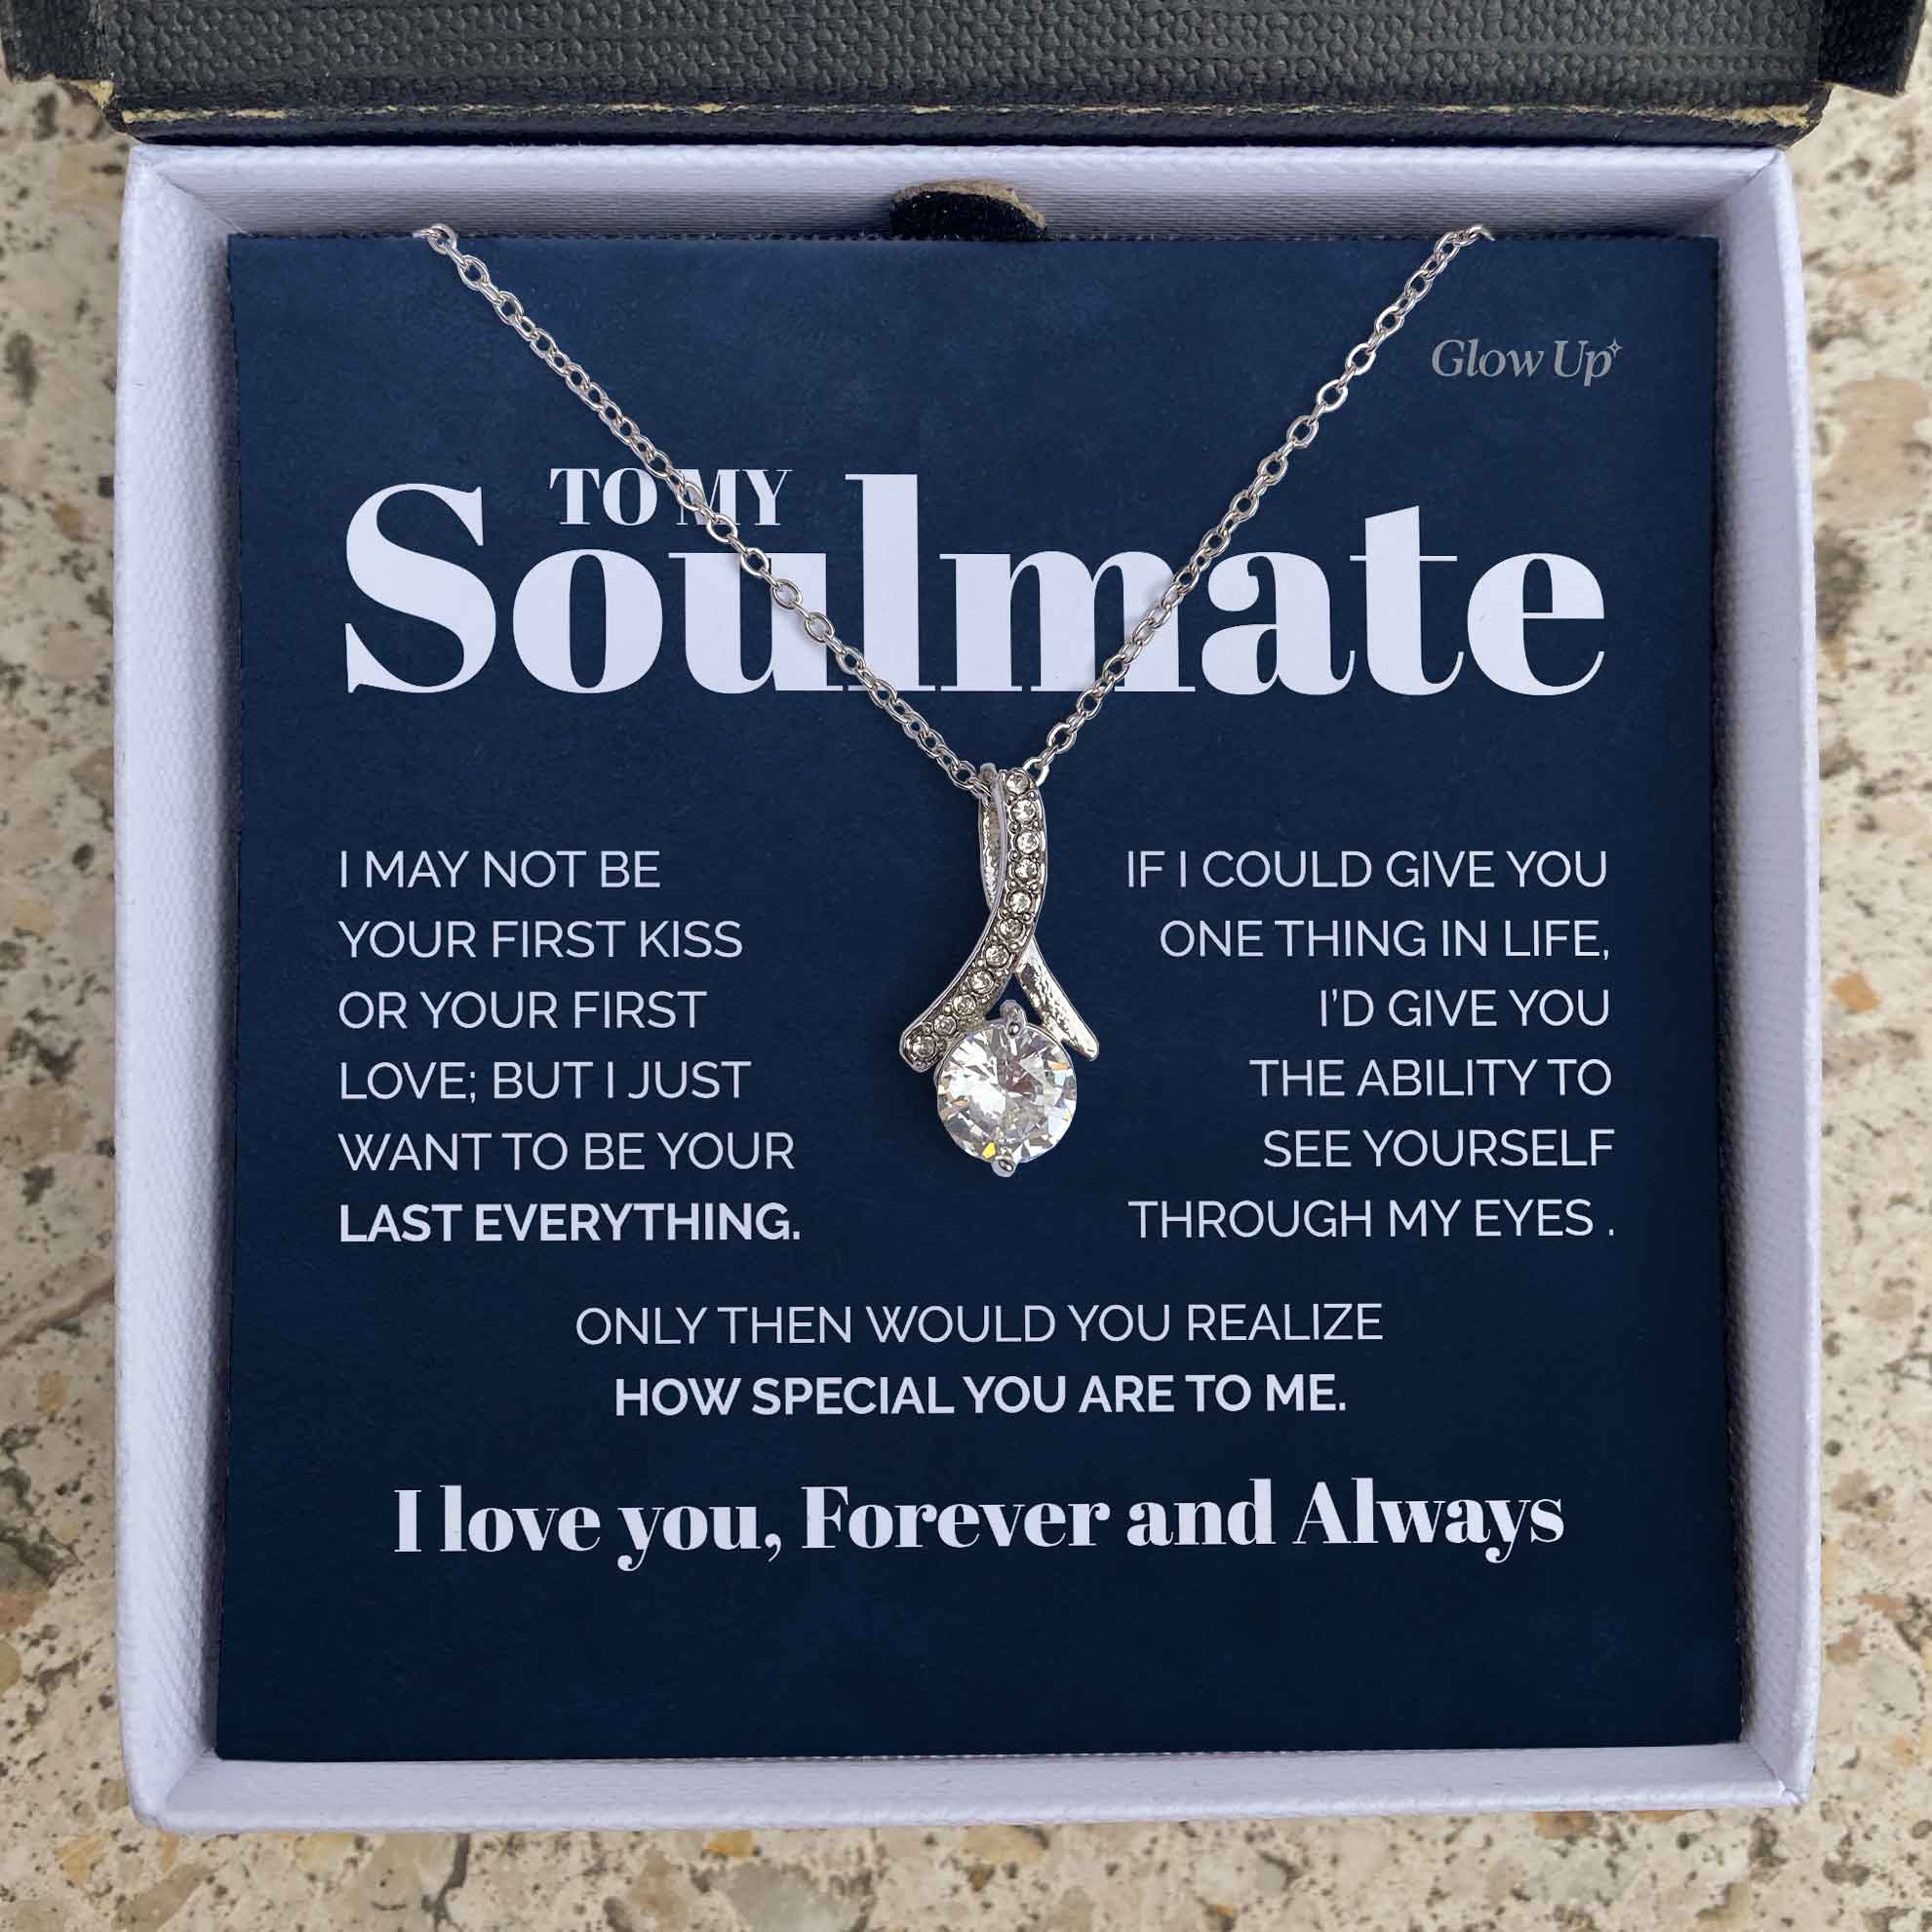 ShineOn Fulfillment Jewelry 14K White Gold Finish / Two-Toned Box To my Soulmate - You are special to me  - Ribbon necklace